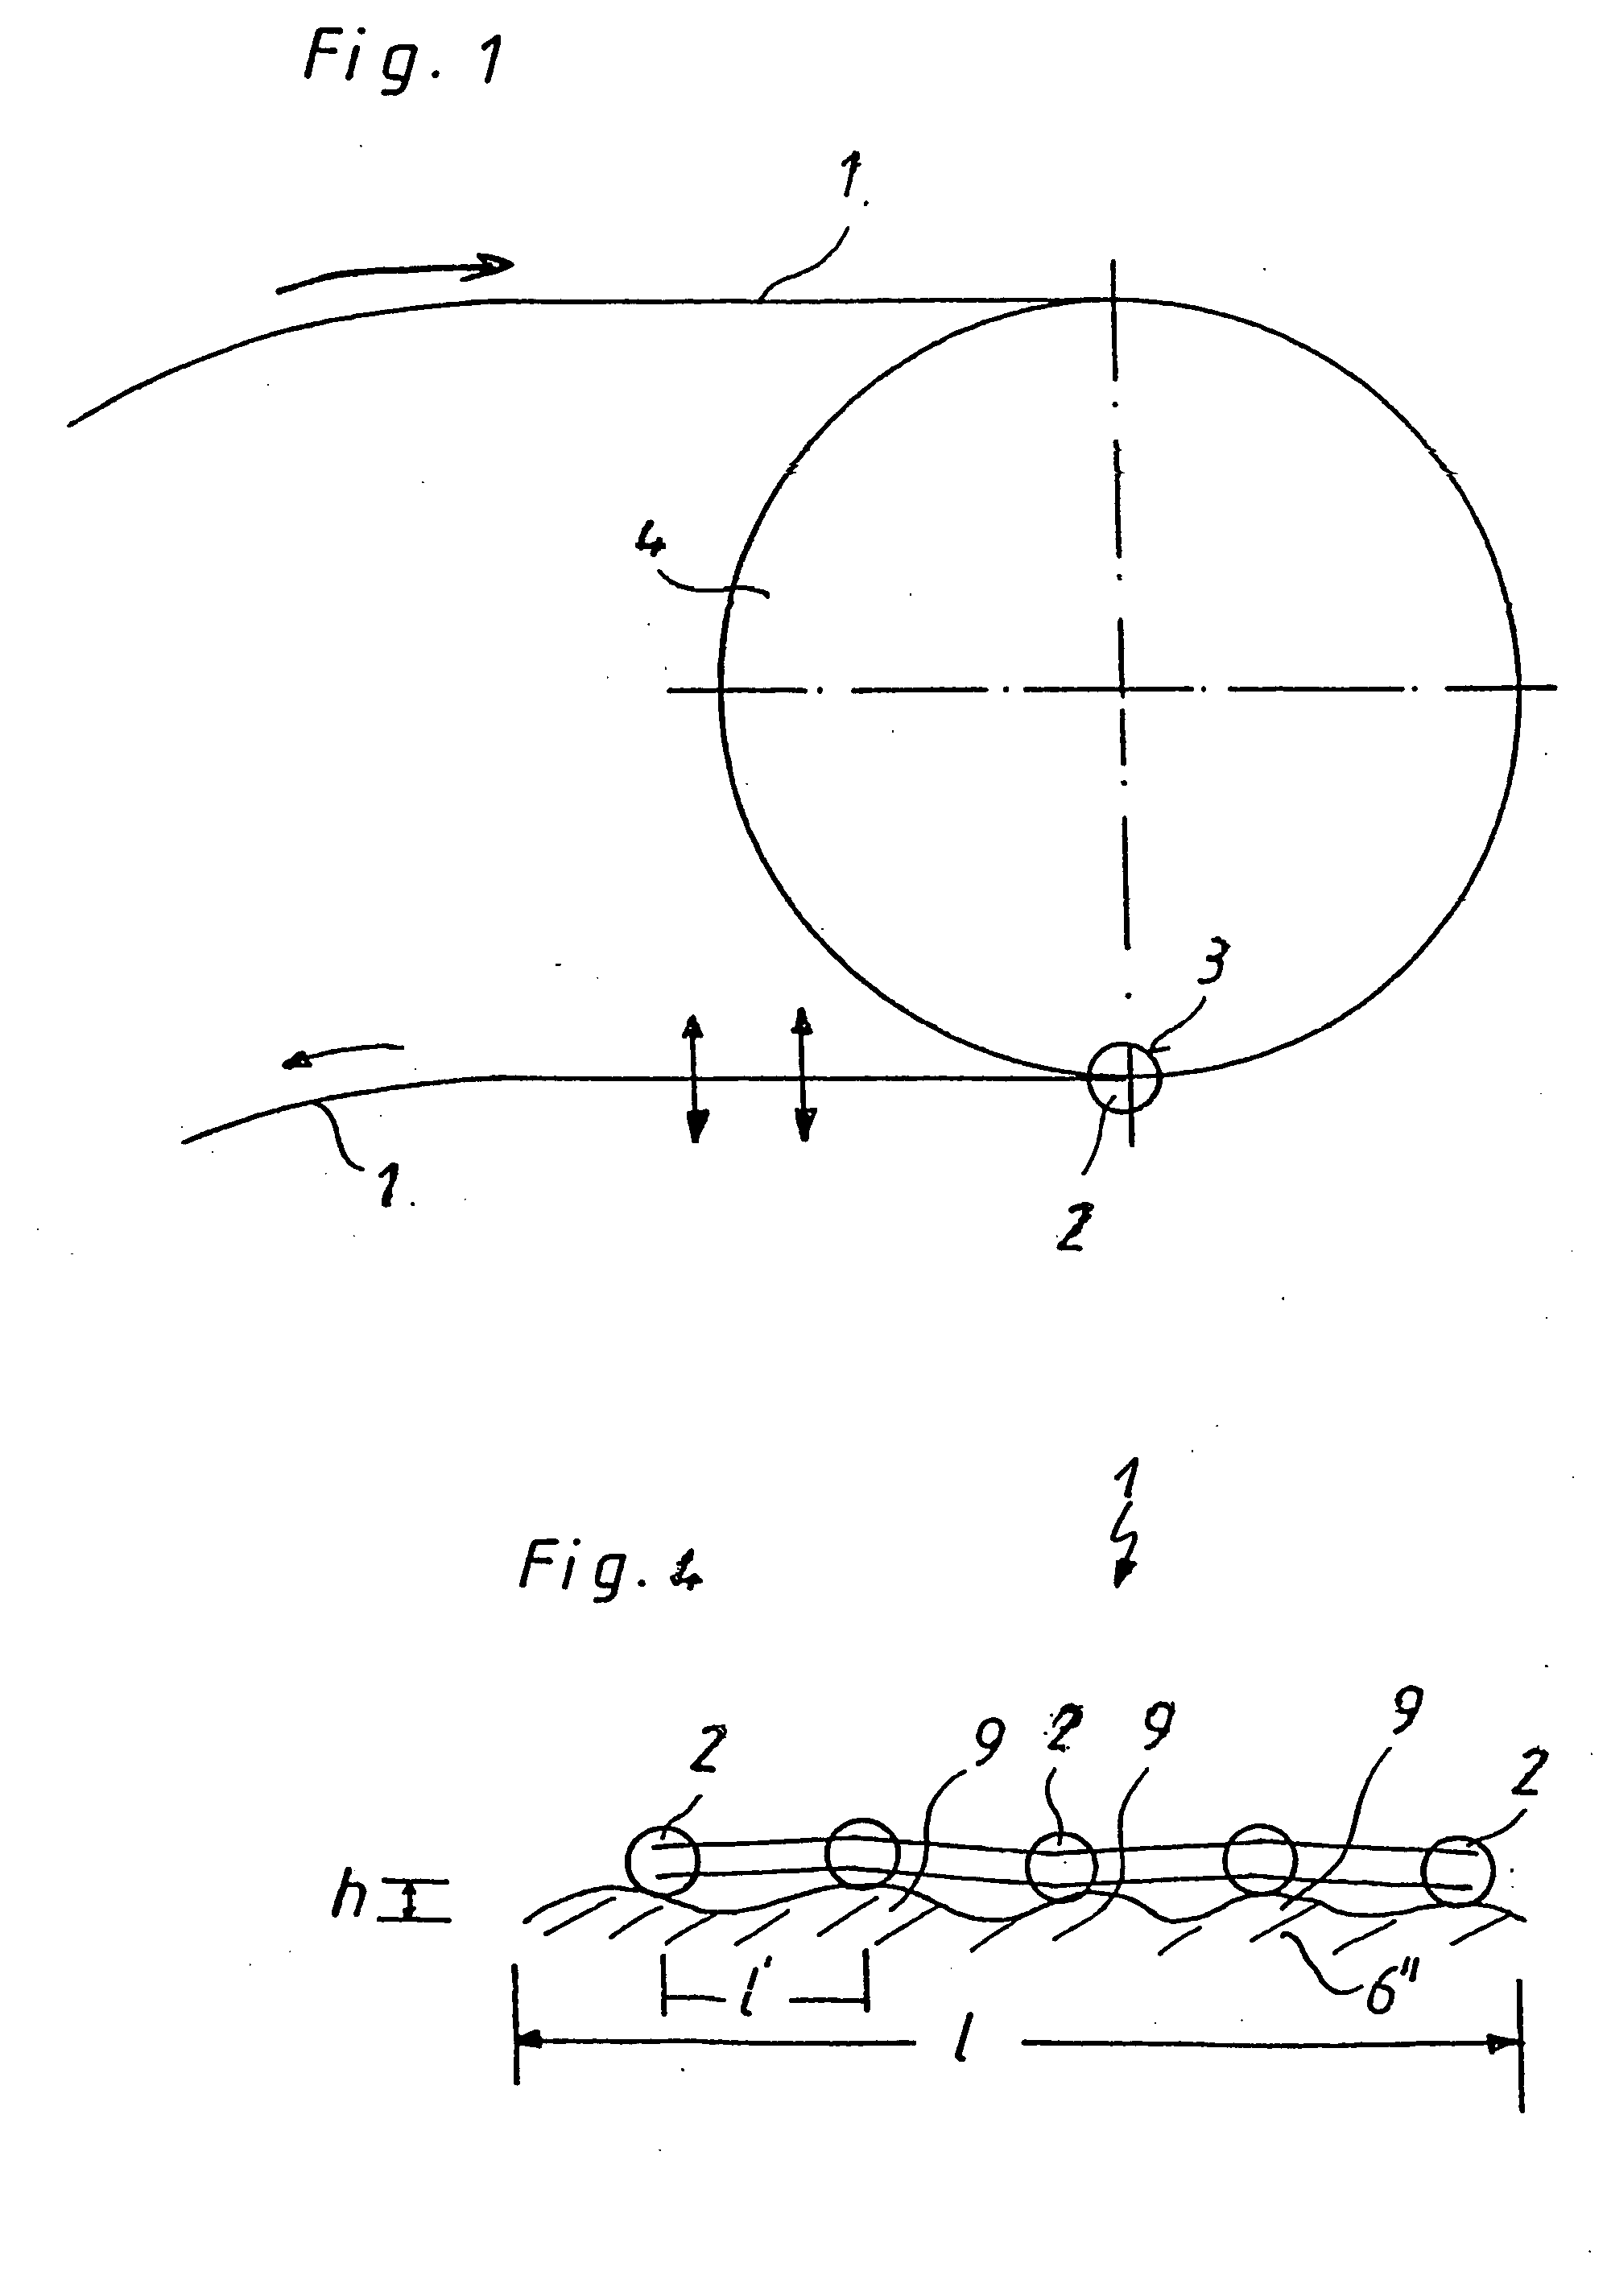 Drive system for reducing the polygon effect in continuous drive chains of escalators or moving walkways